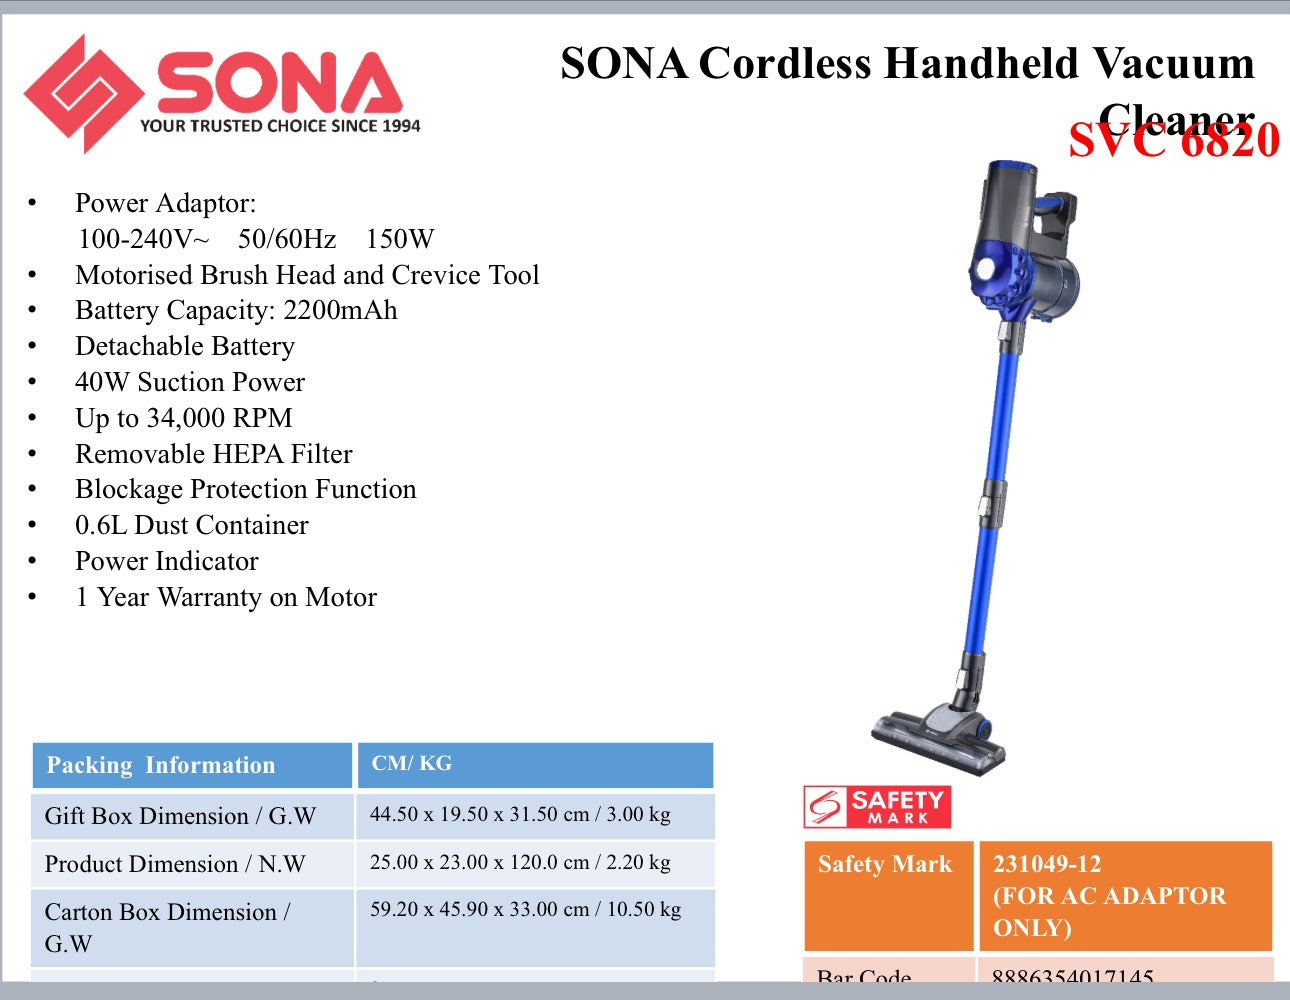 Sona Cordless Handheld Vacuum Cleaner - Rechargeable [150W] SVC 6820